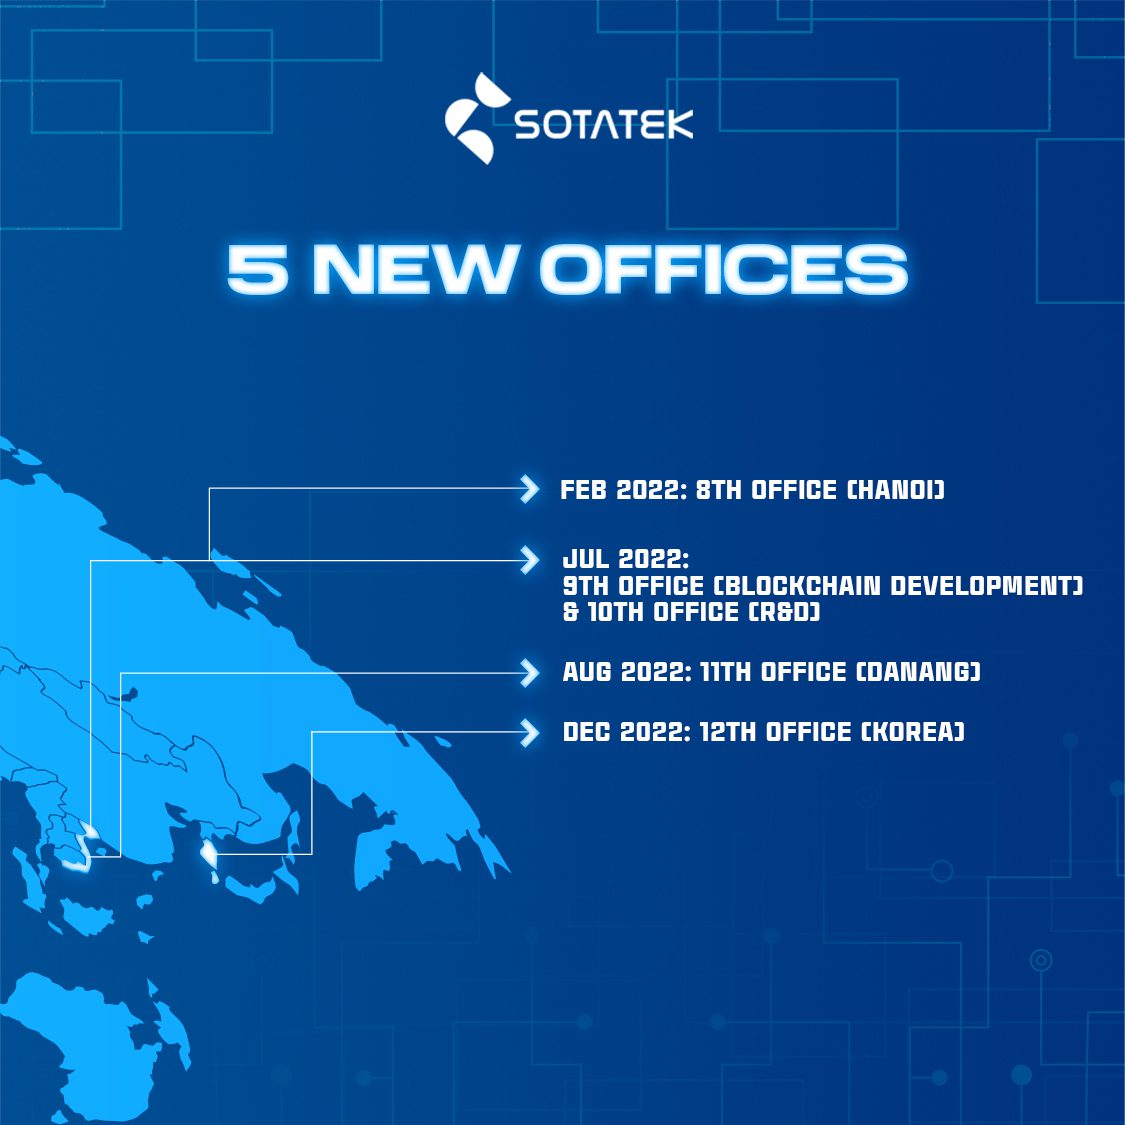 SotaTek Successfully Opened 5 New Offices